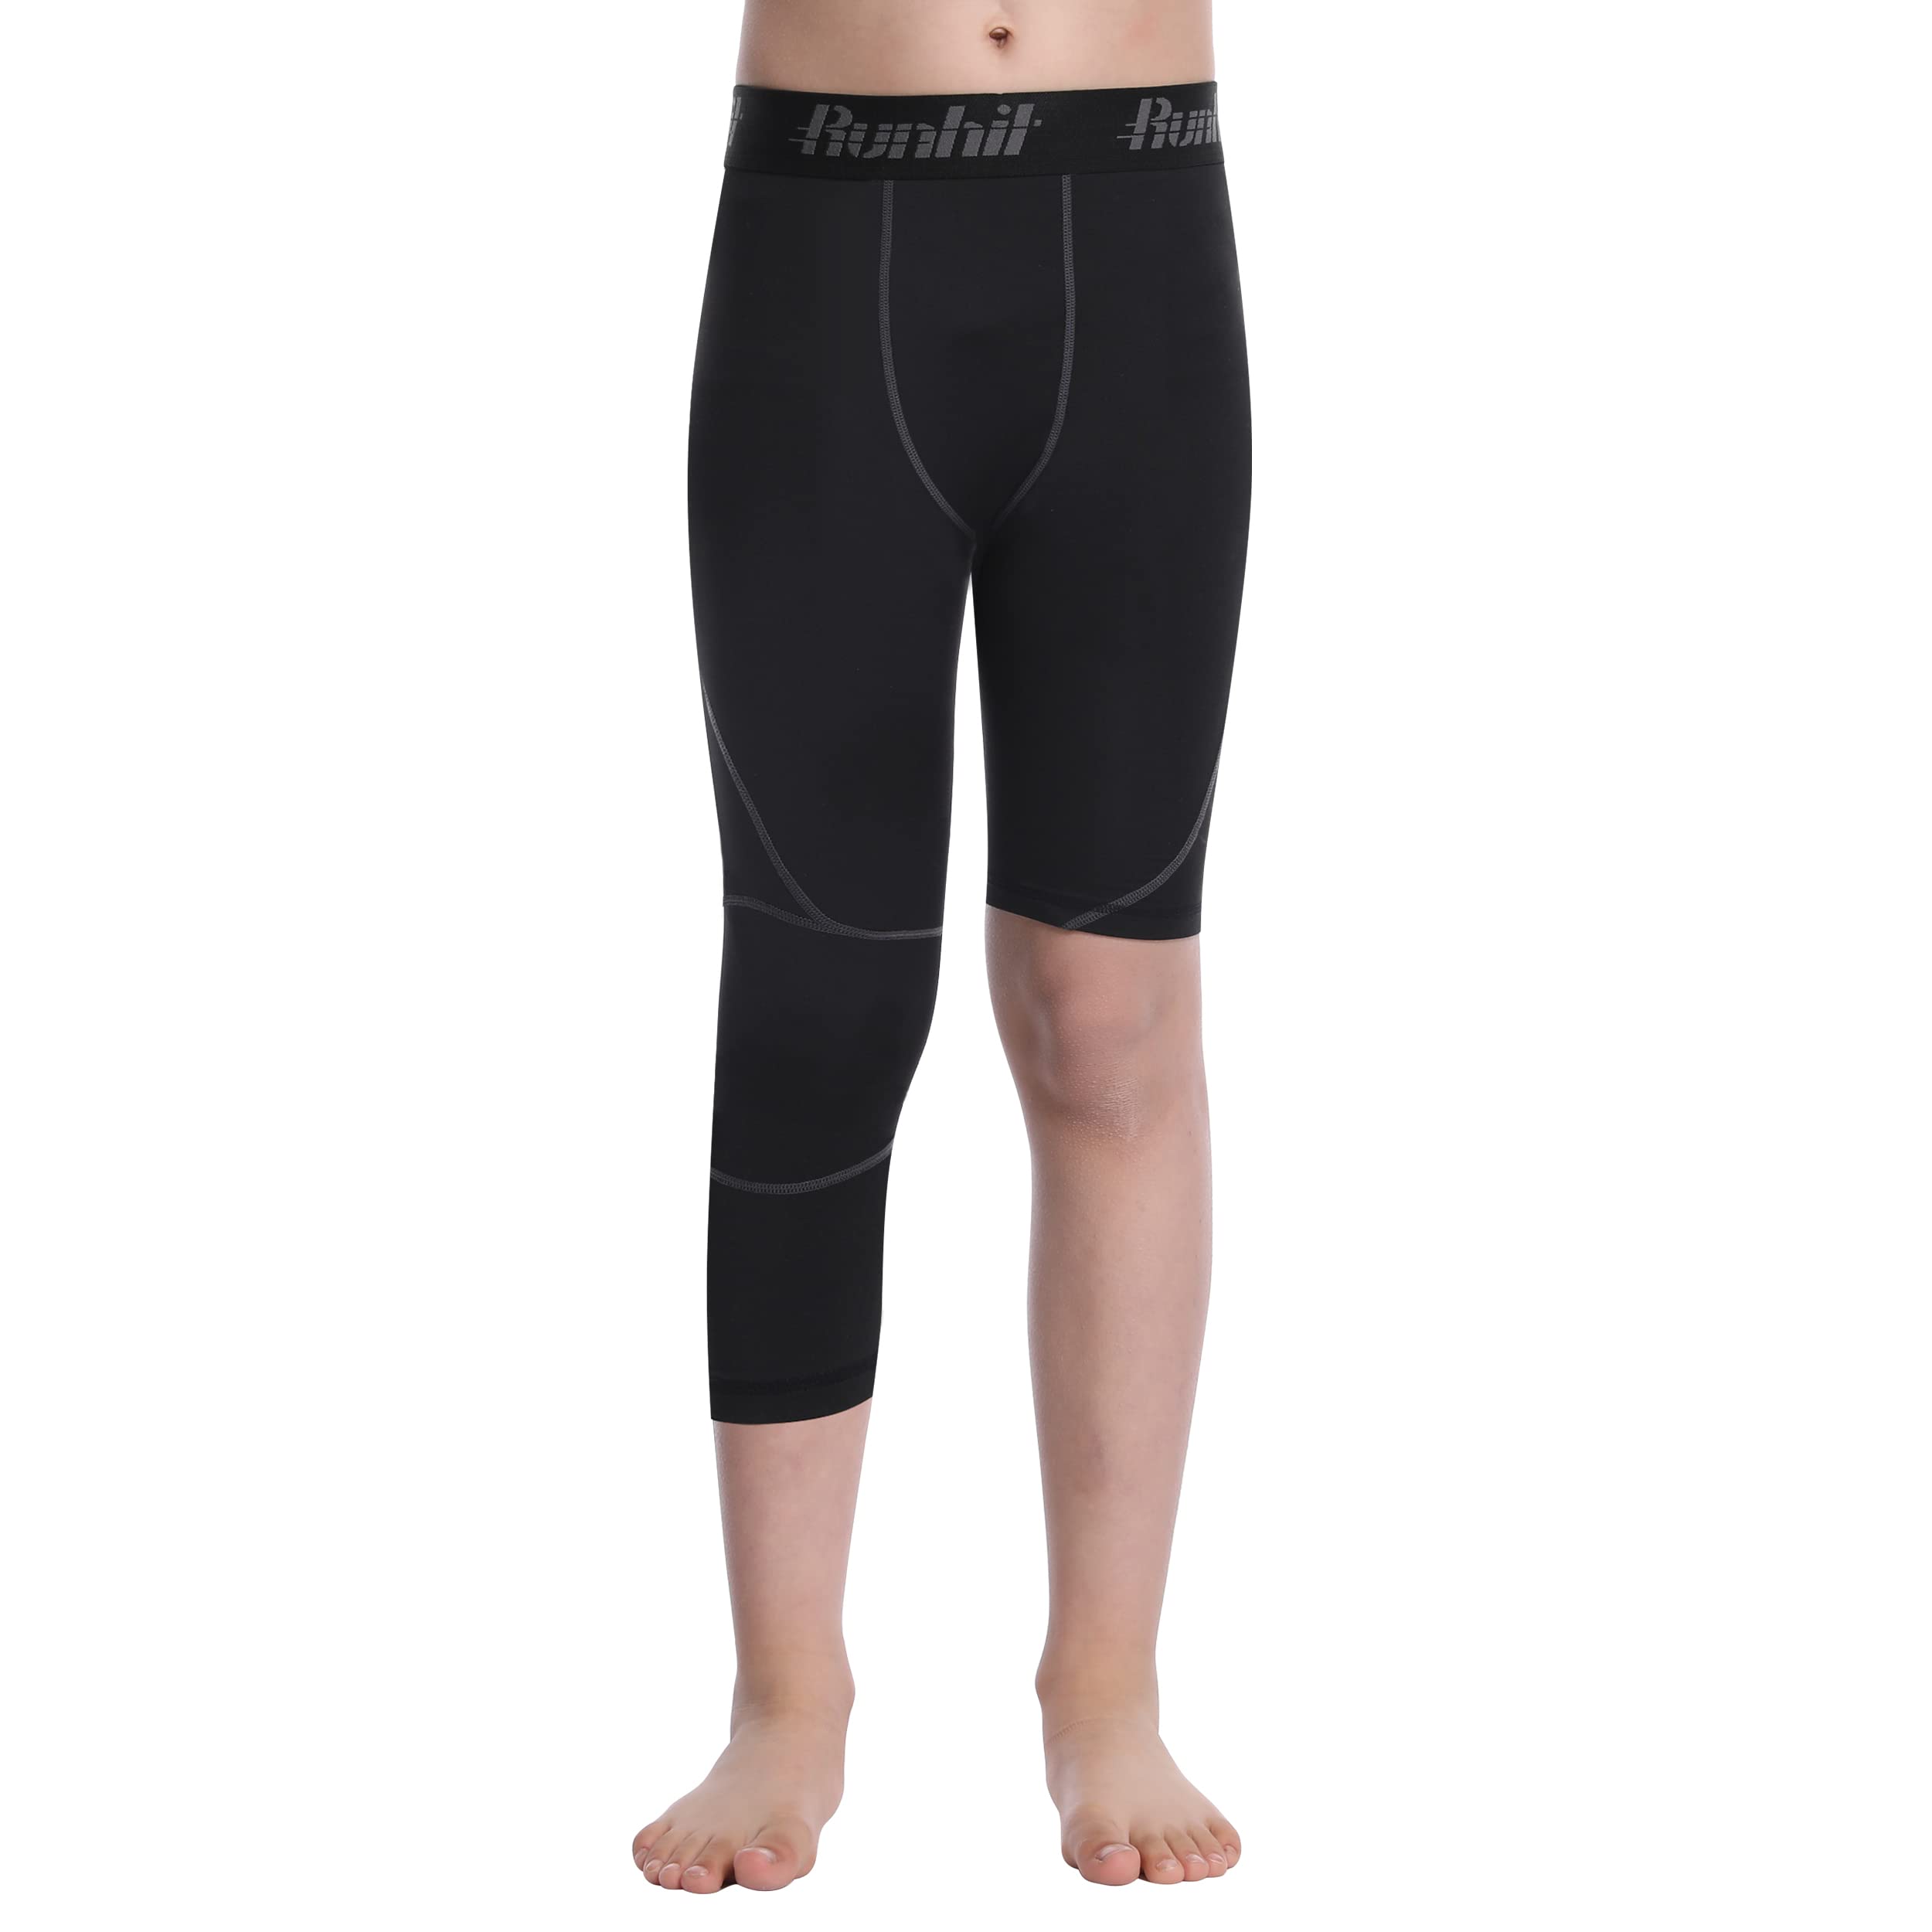 BASE Men's Recovery Tights - Black – BASE Compression